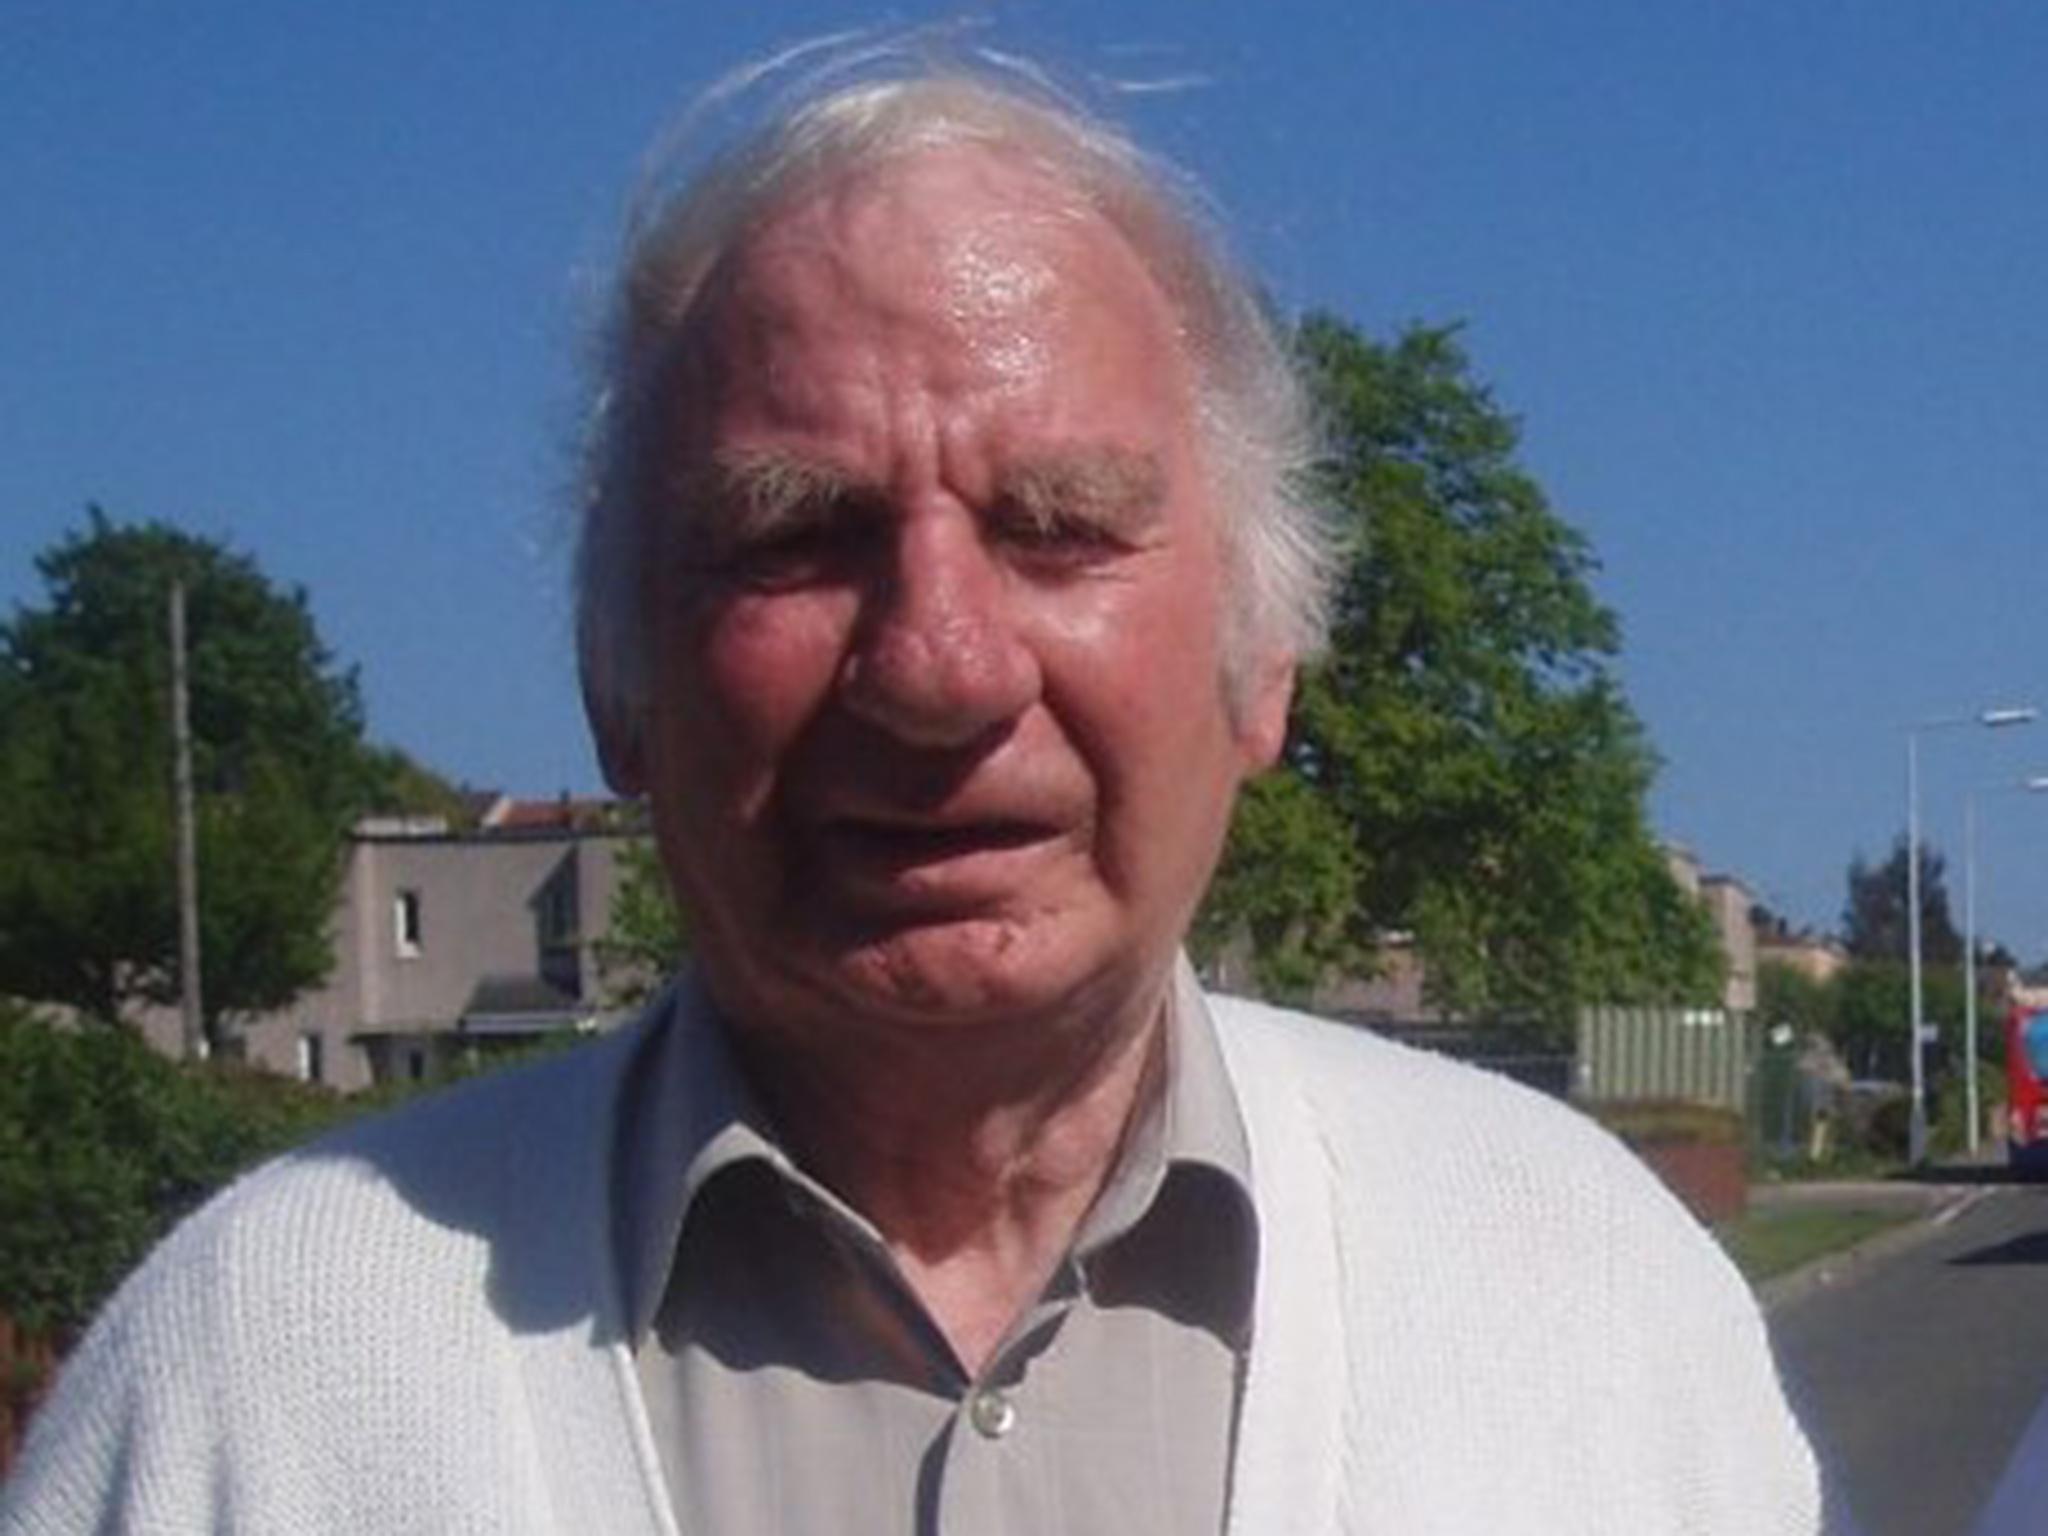 Mr Clarke represented the town of Ballingry for more than 40 years